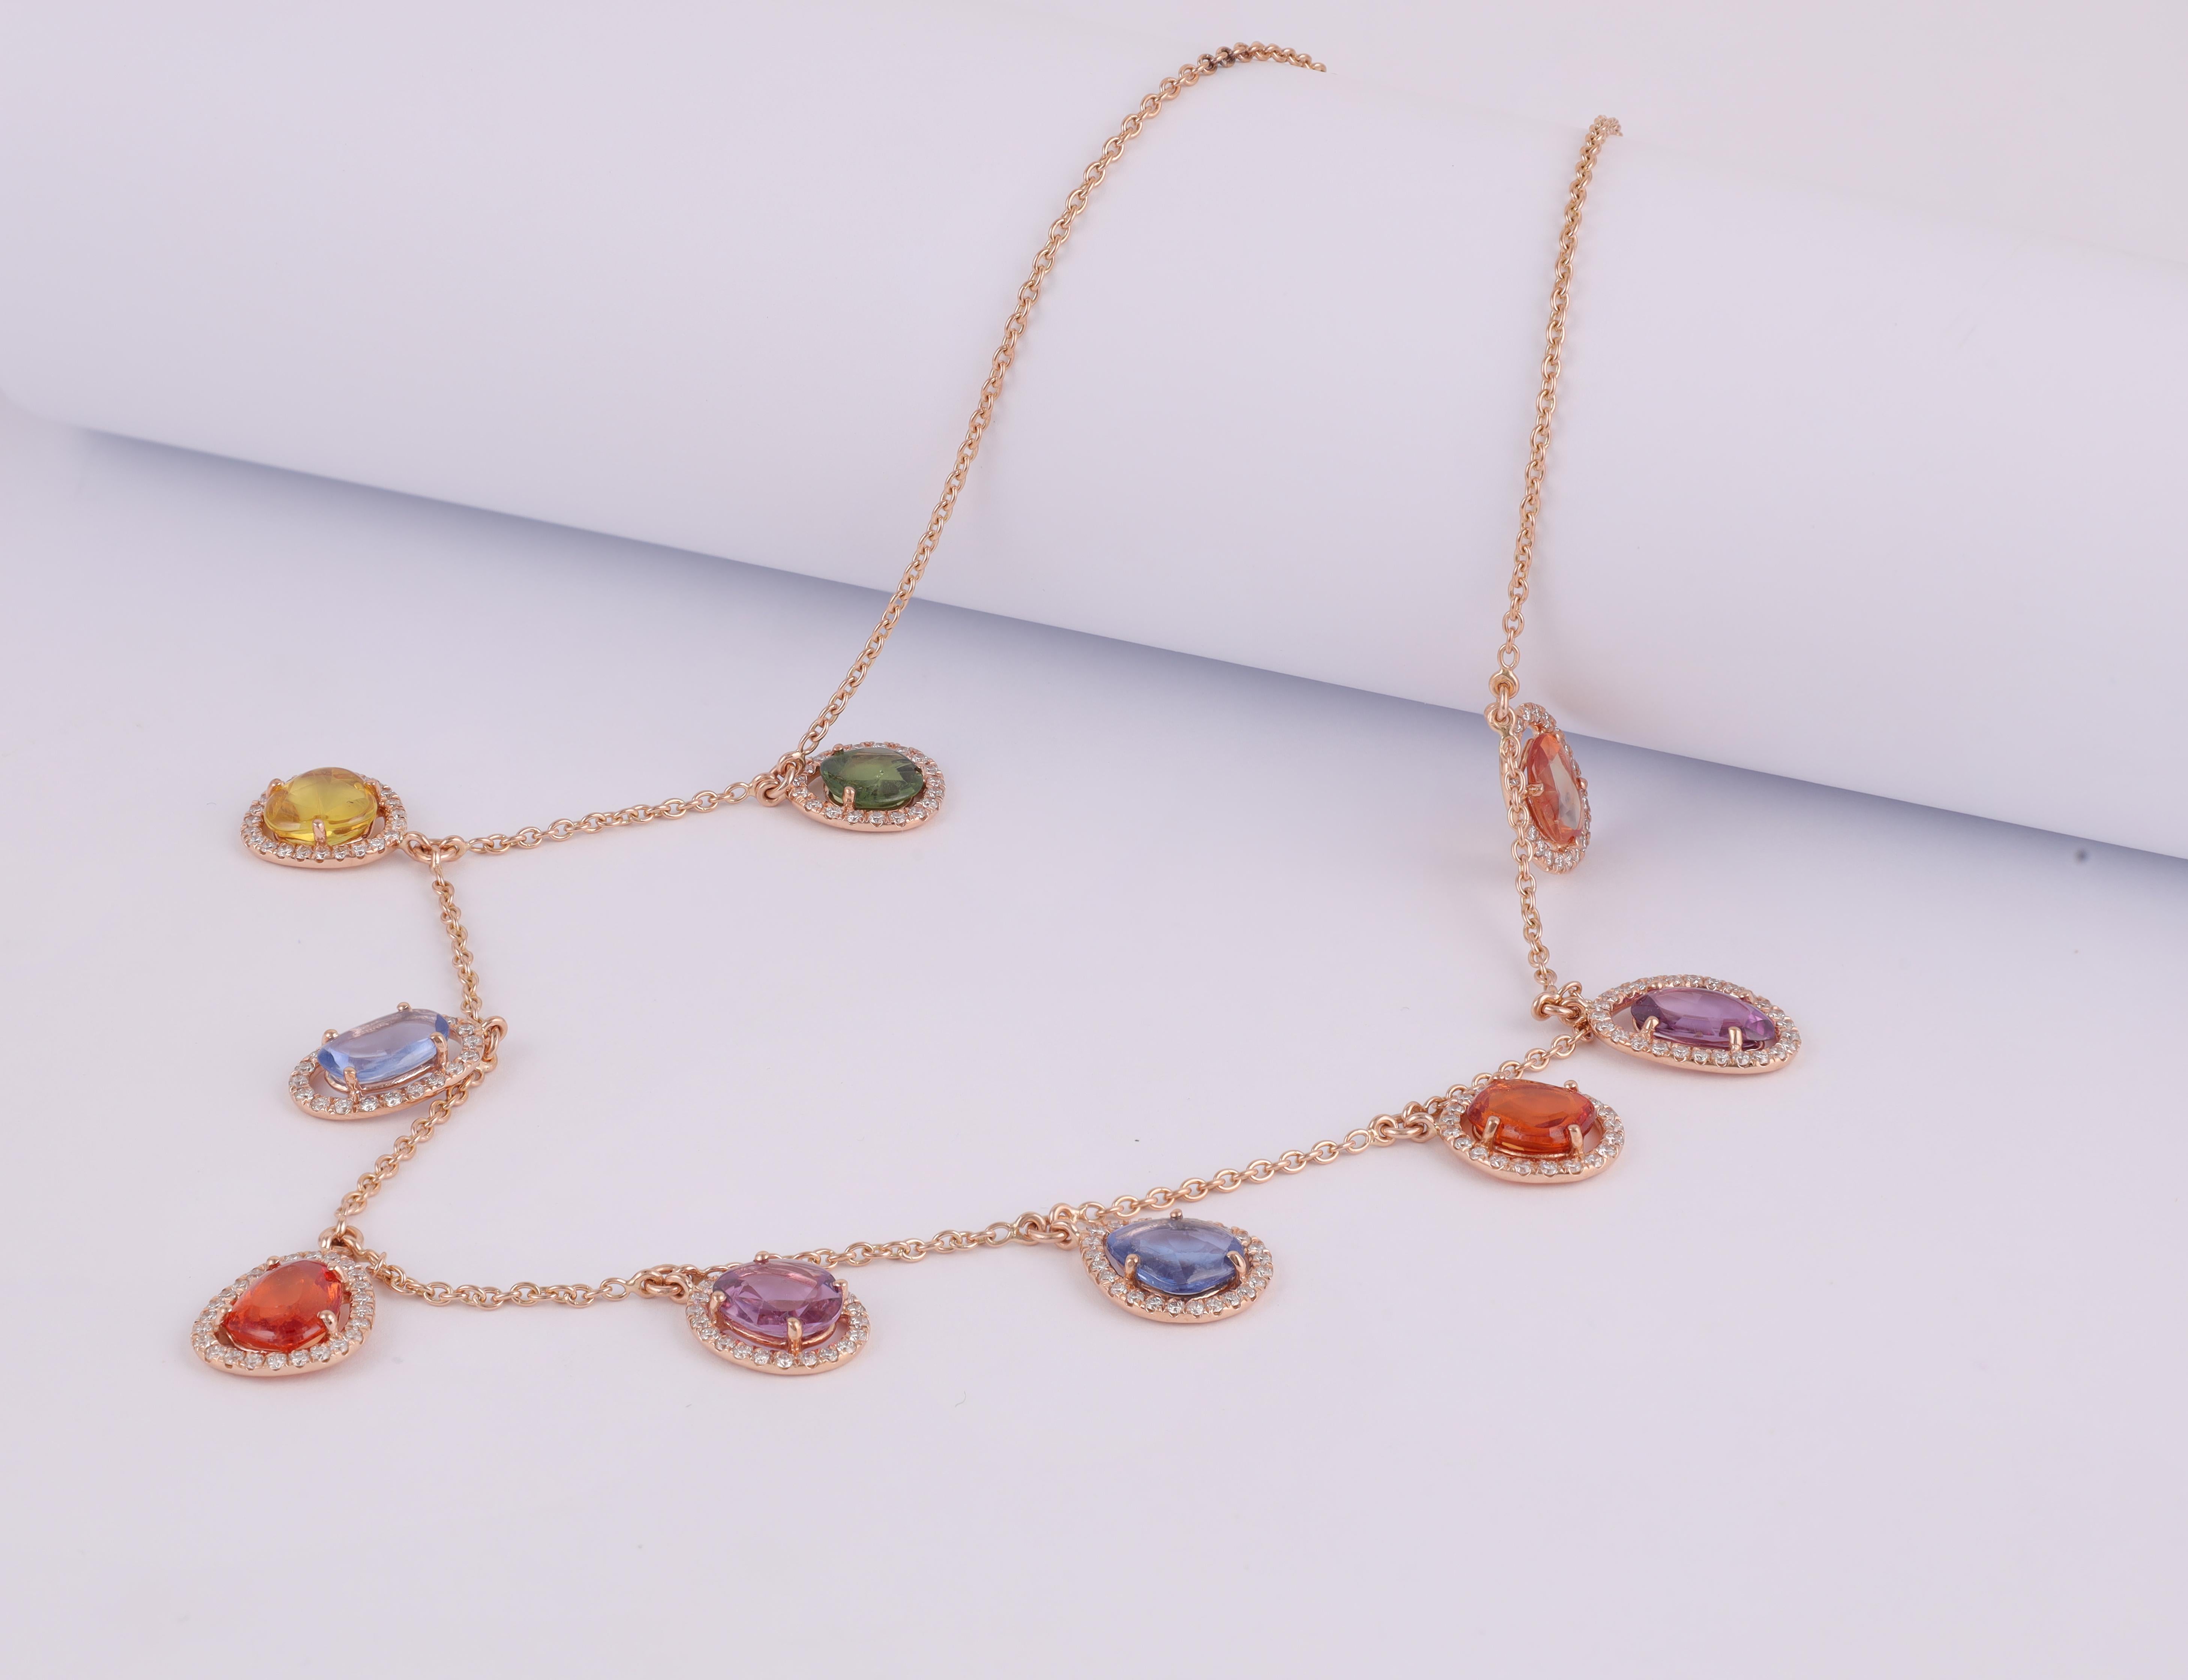 12.70 Carat Multi-Colors Rainbow Sapphires & Diamond Chain Necklace in 18k Gold In New Condition For Sale In Jaipur, Rajasthan